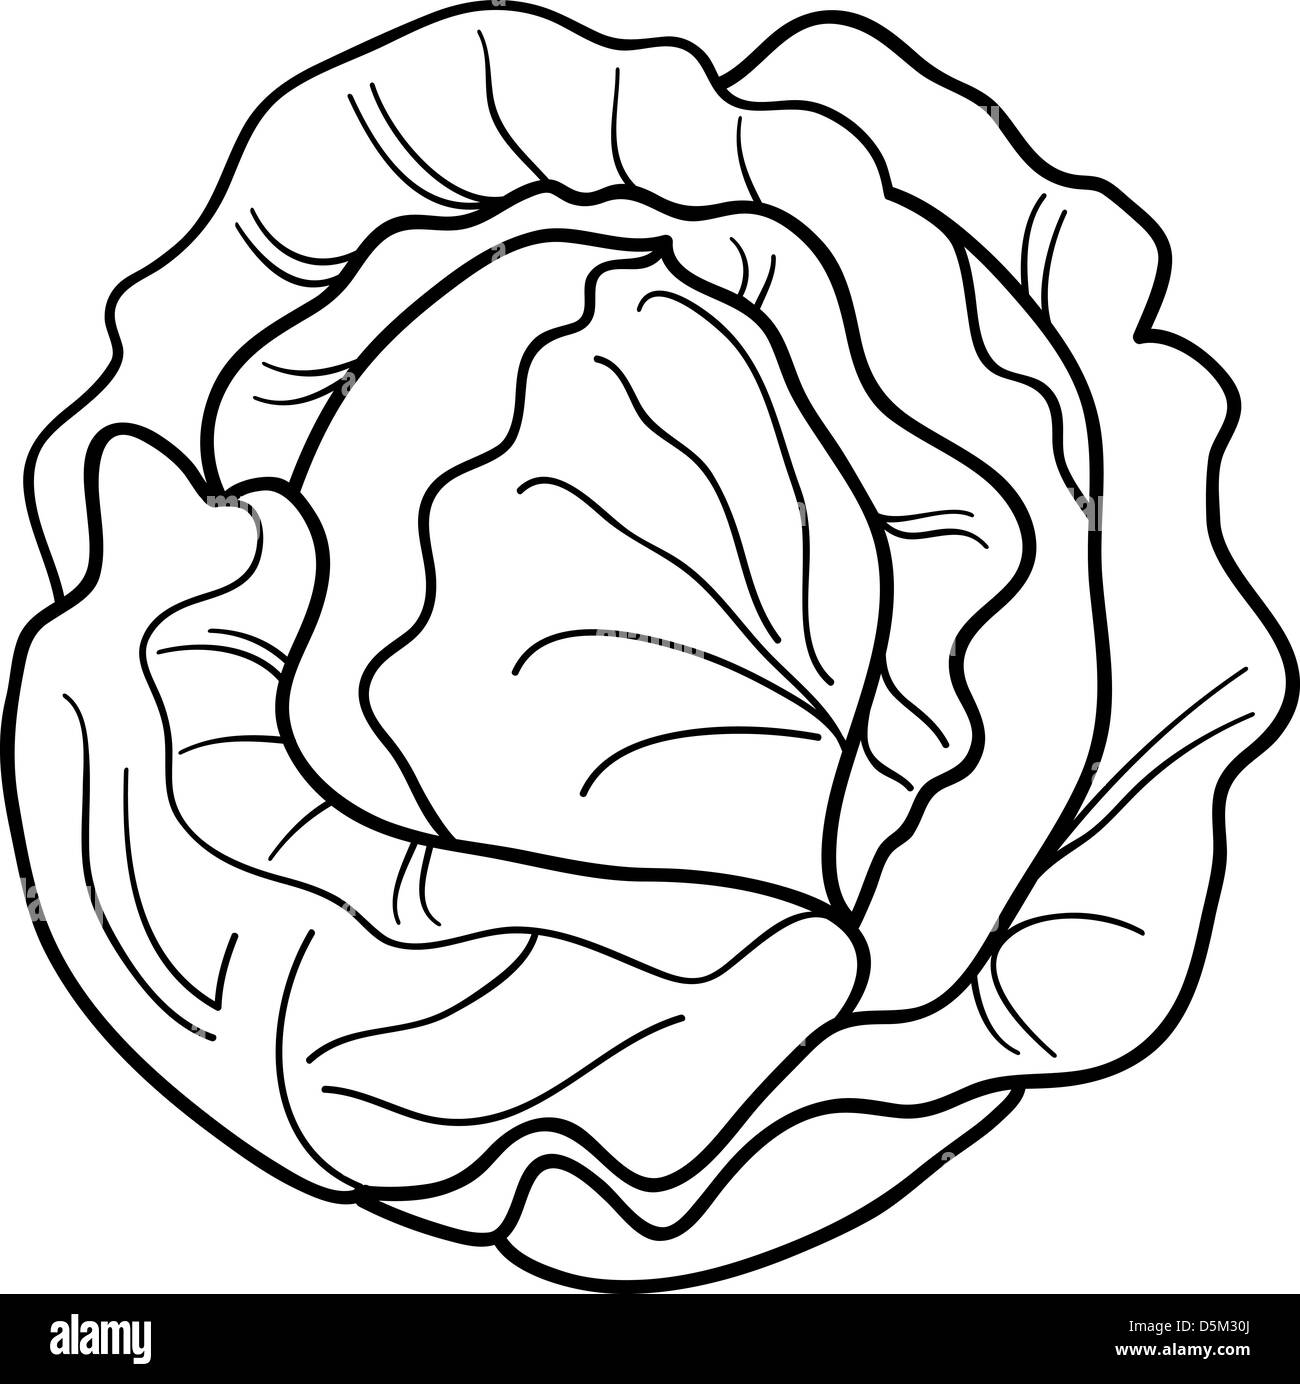 Black and White Cartoon Illustration of Cabbage or Lettuce for Coloring Book Stock Photo